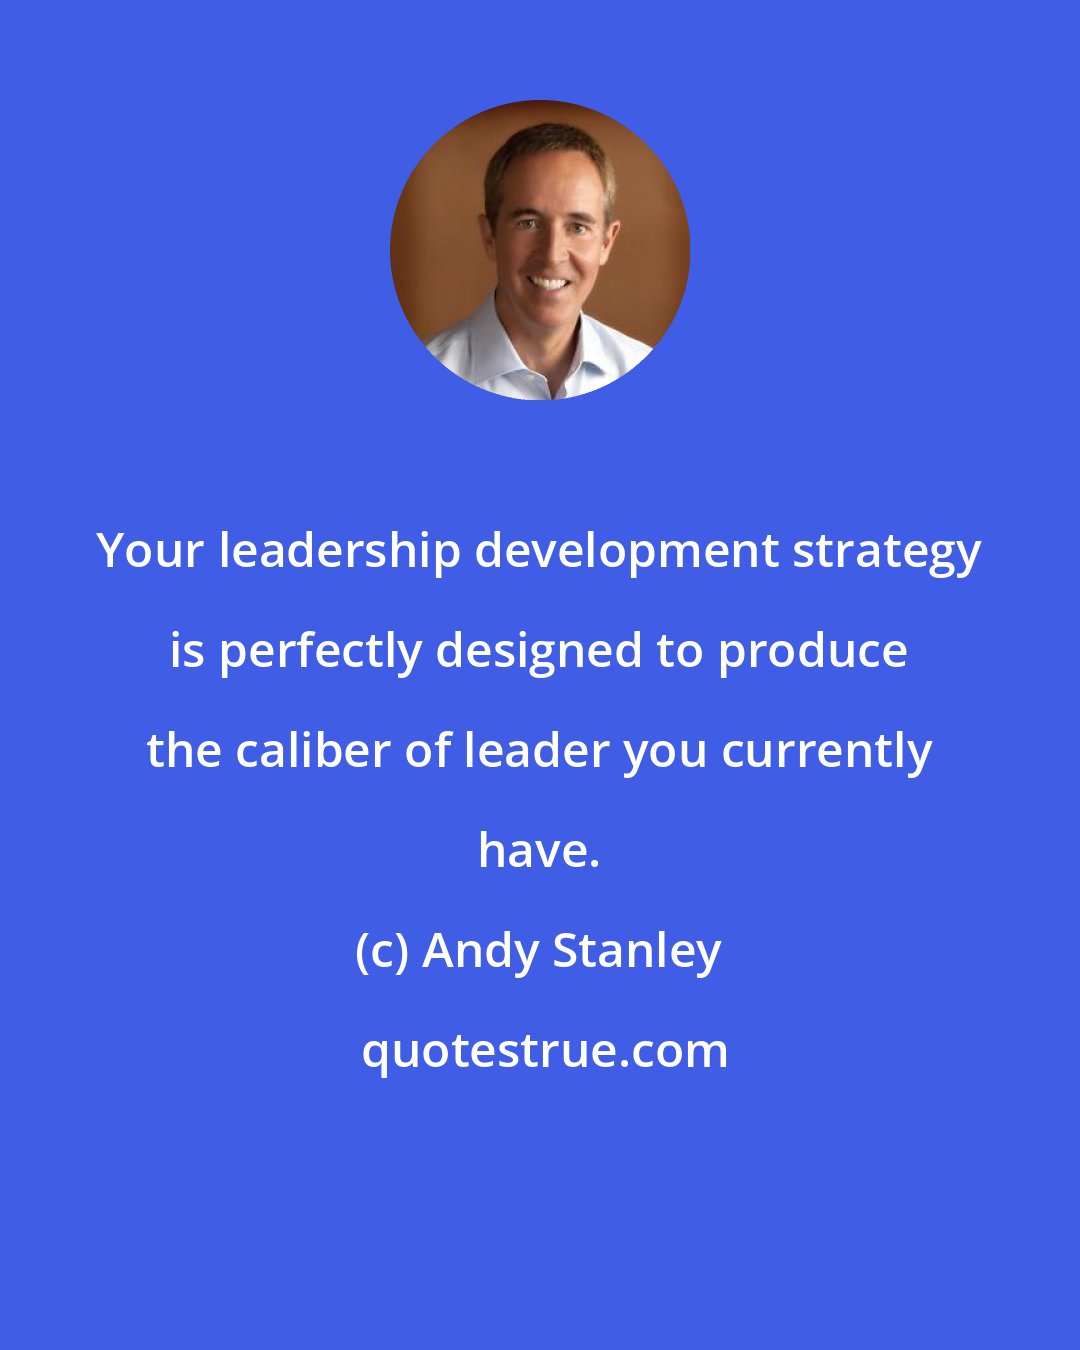 Andy Stanley: Your leadership development strategy is perfectly designed to produce the caliber of leader you currently have.